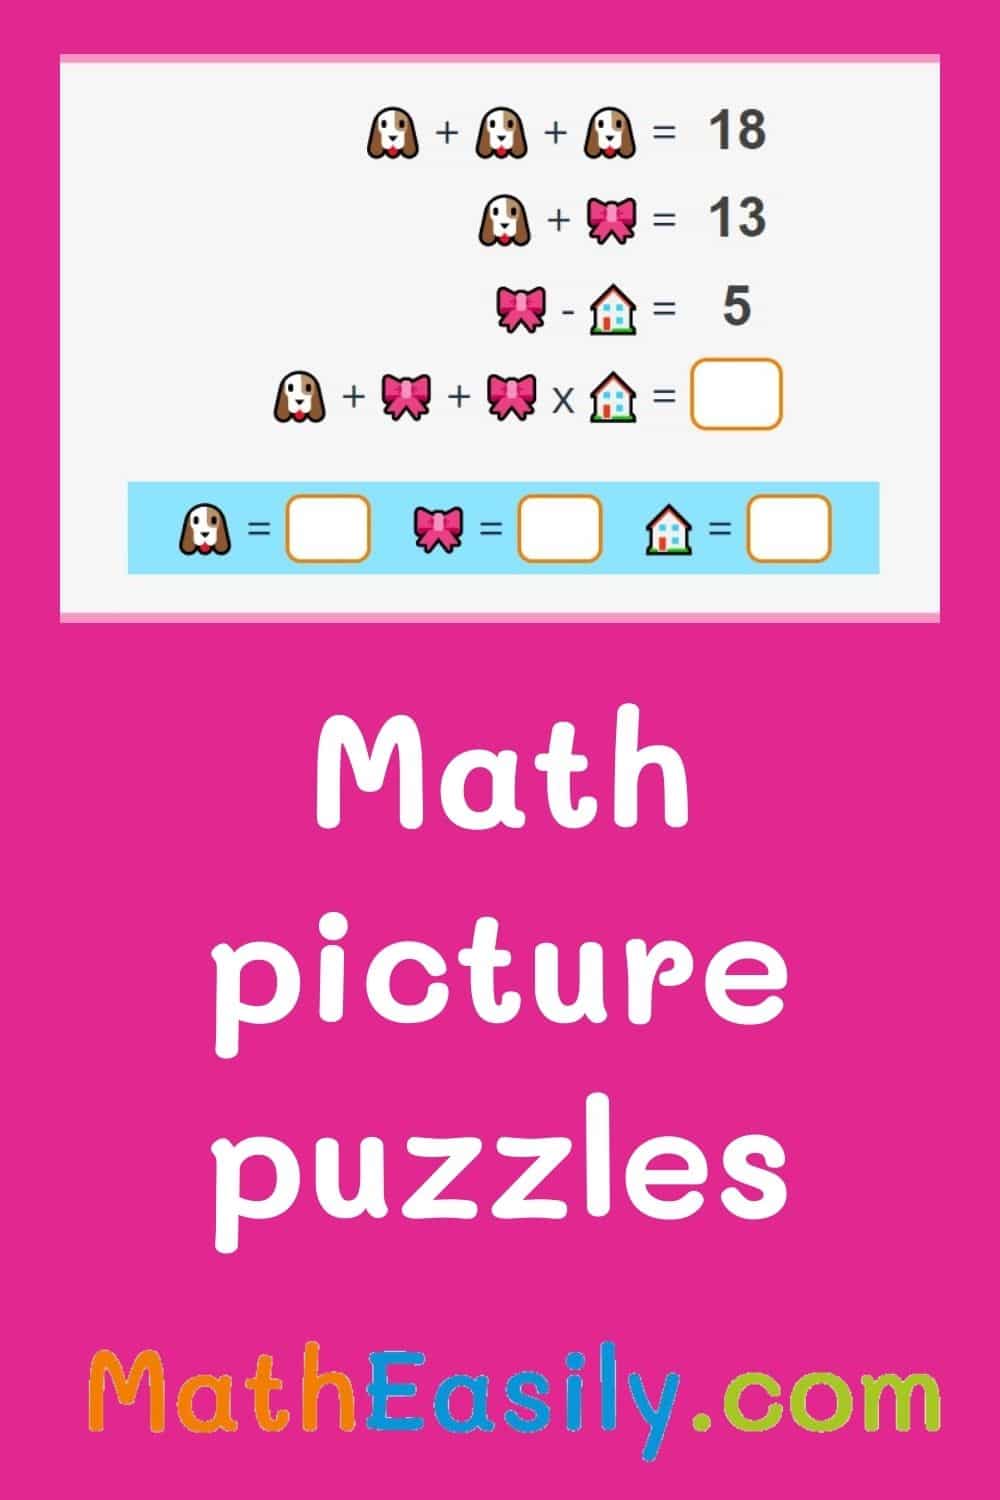 mathematical puzzles. math riddles online. Free math puzzles with answers PDF. maths puzzle questions. math riddles game.
    online brain teaser games. number games puzzles. printable math riddles worksheets free printable. printable math puzzles with answers PDF.